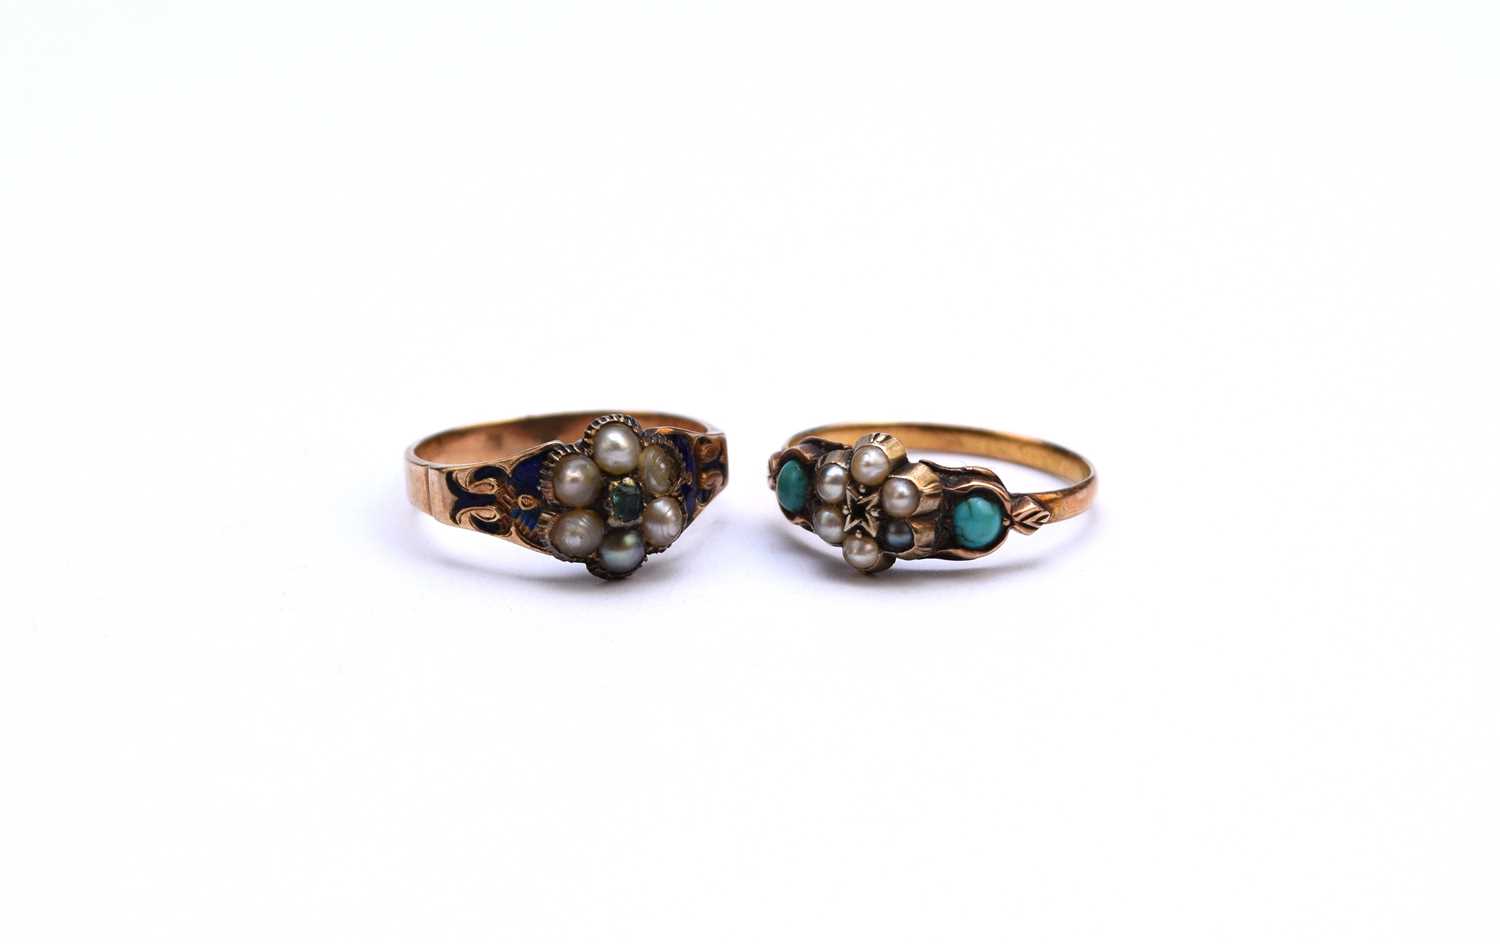 Two 19th century seed pearl set rings